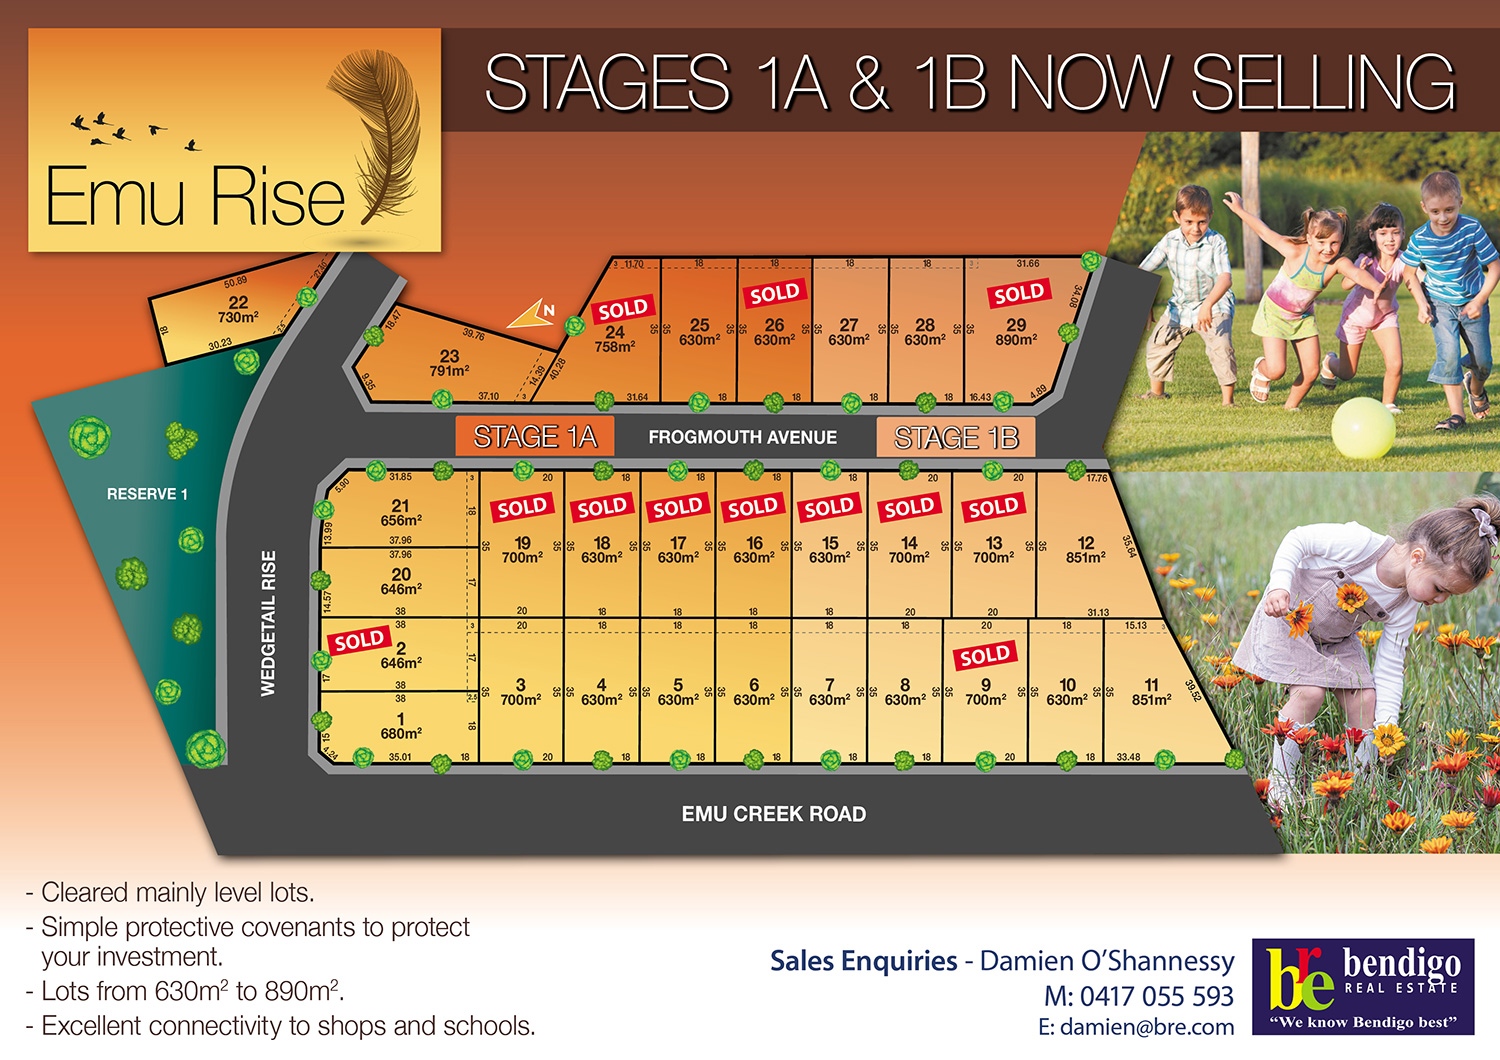 Emu Rise - Stage 1A & 1B Now Selling